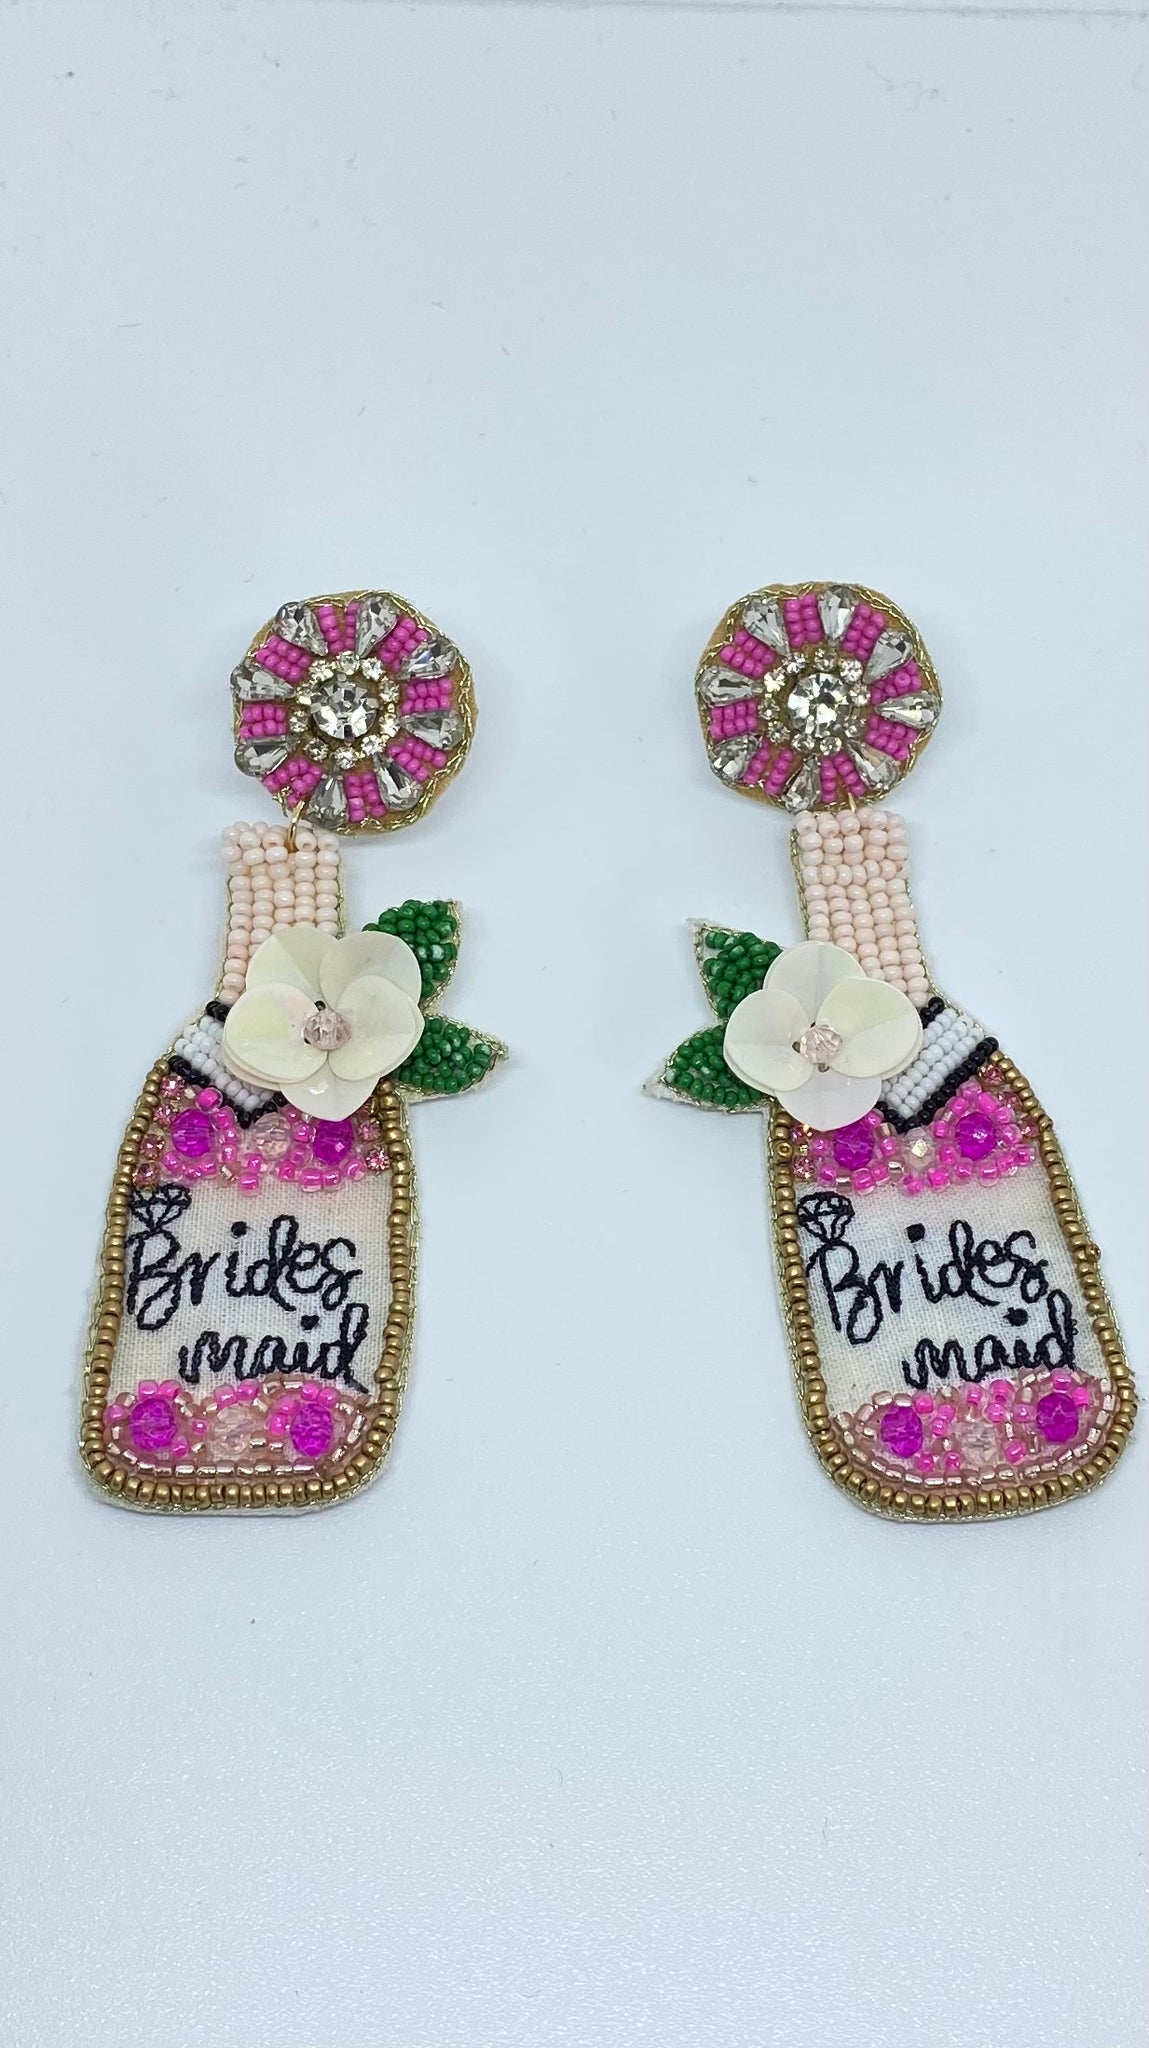 Bridesmaid Champagne Bottle Earrings - Pink